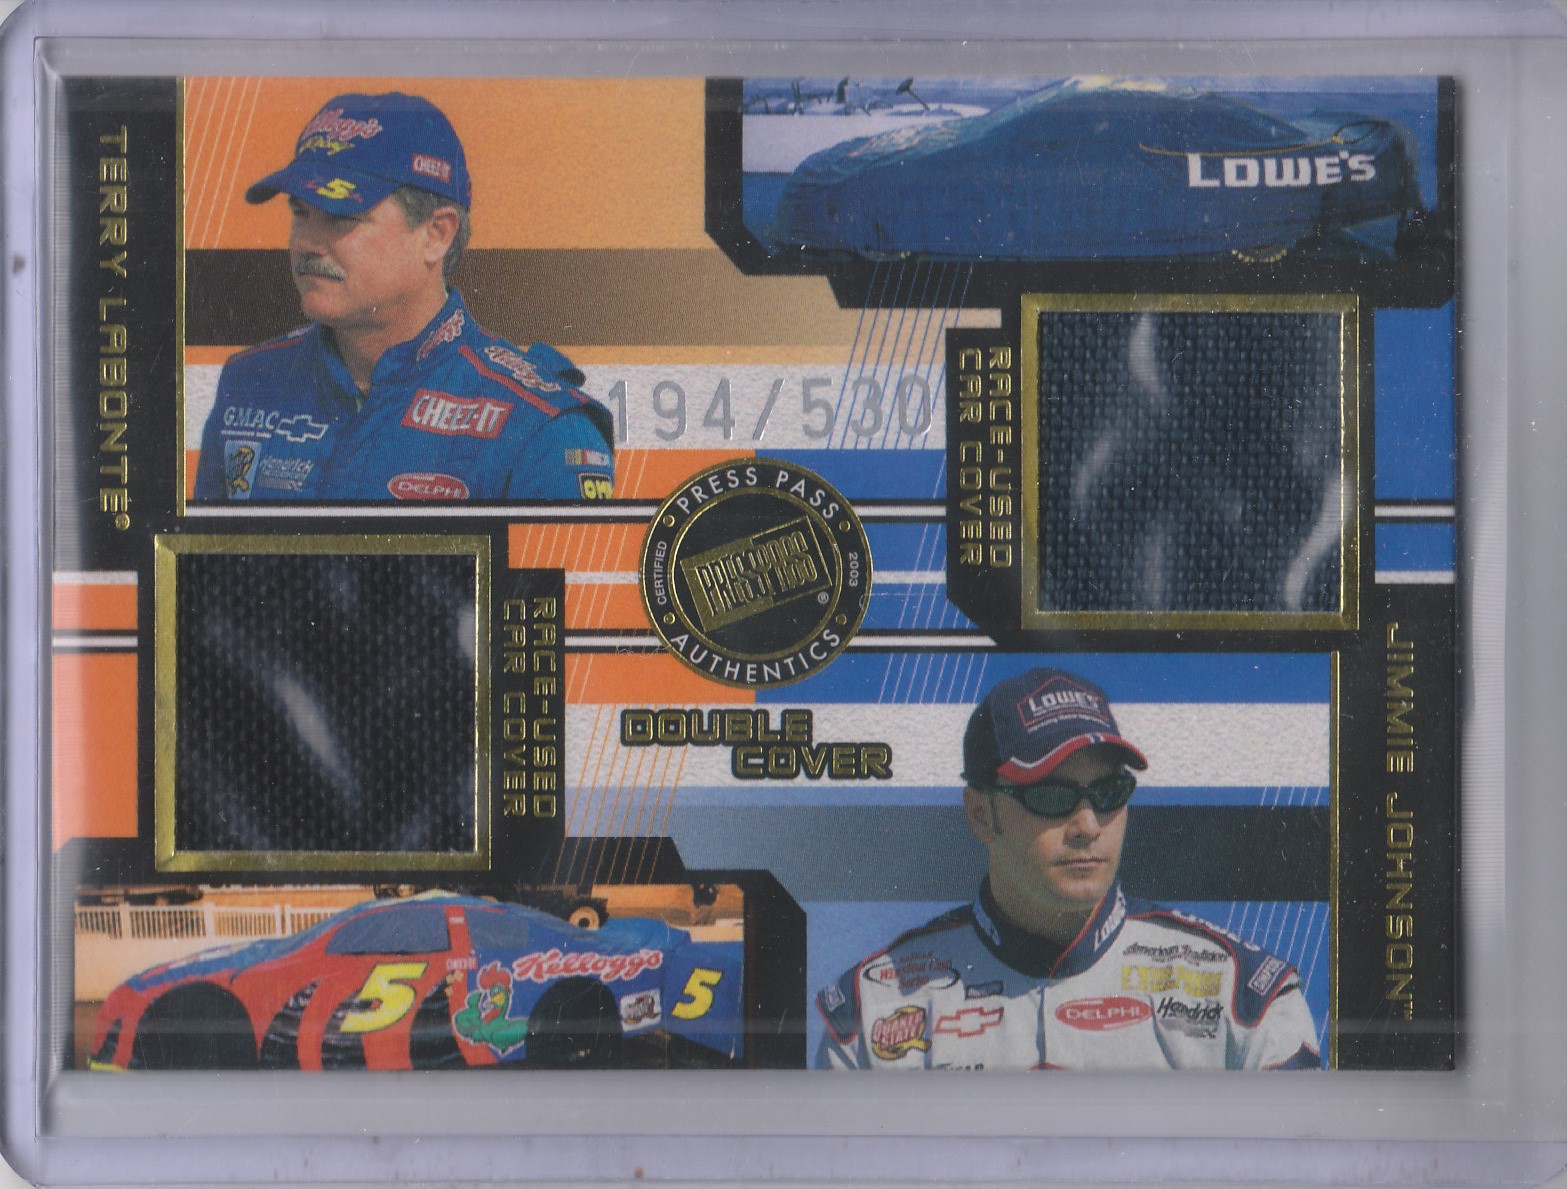 2003 Press Pass Eclipse Under Cover Double Cover #DC5 Terry Labonte/Jimmie Johnson